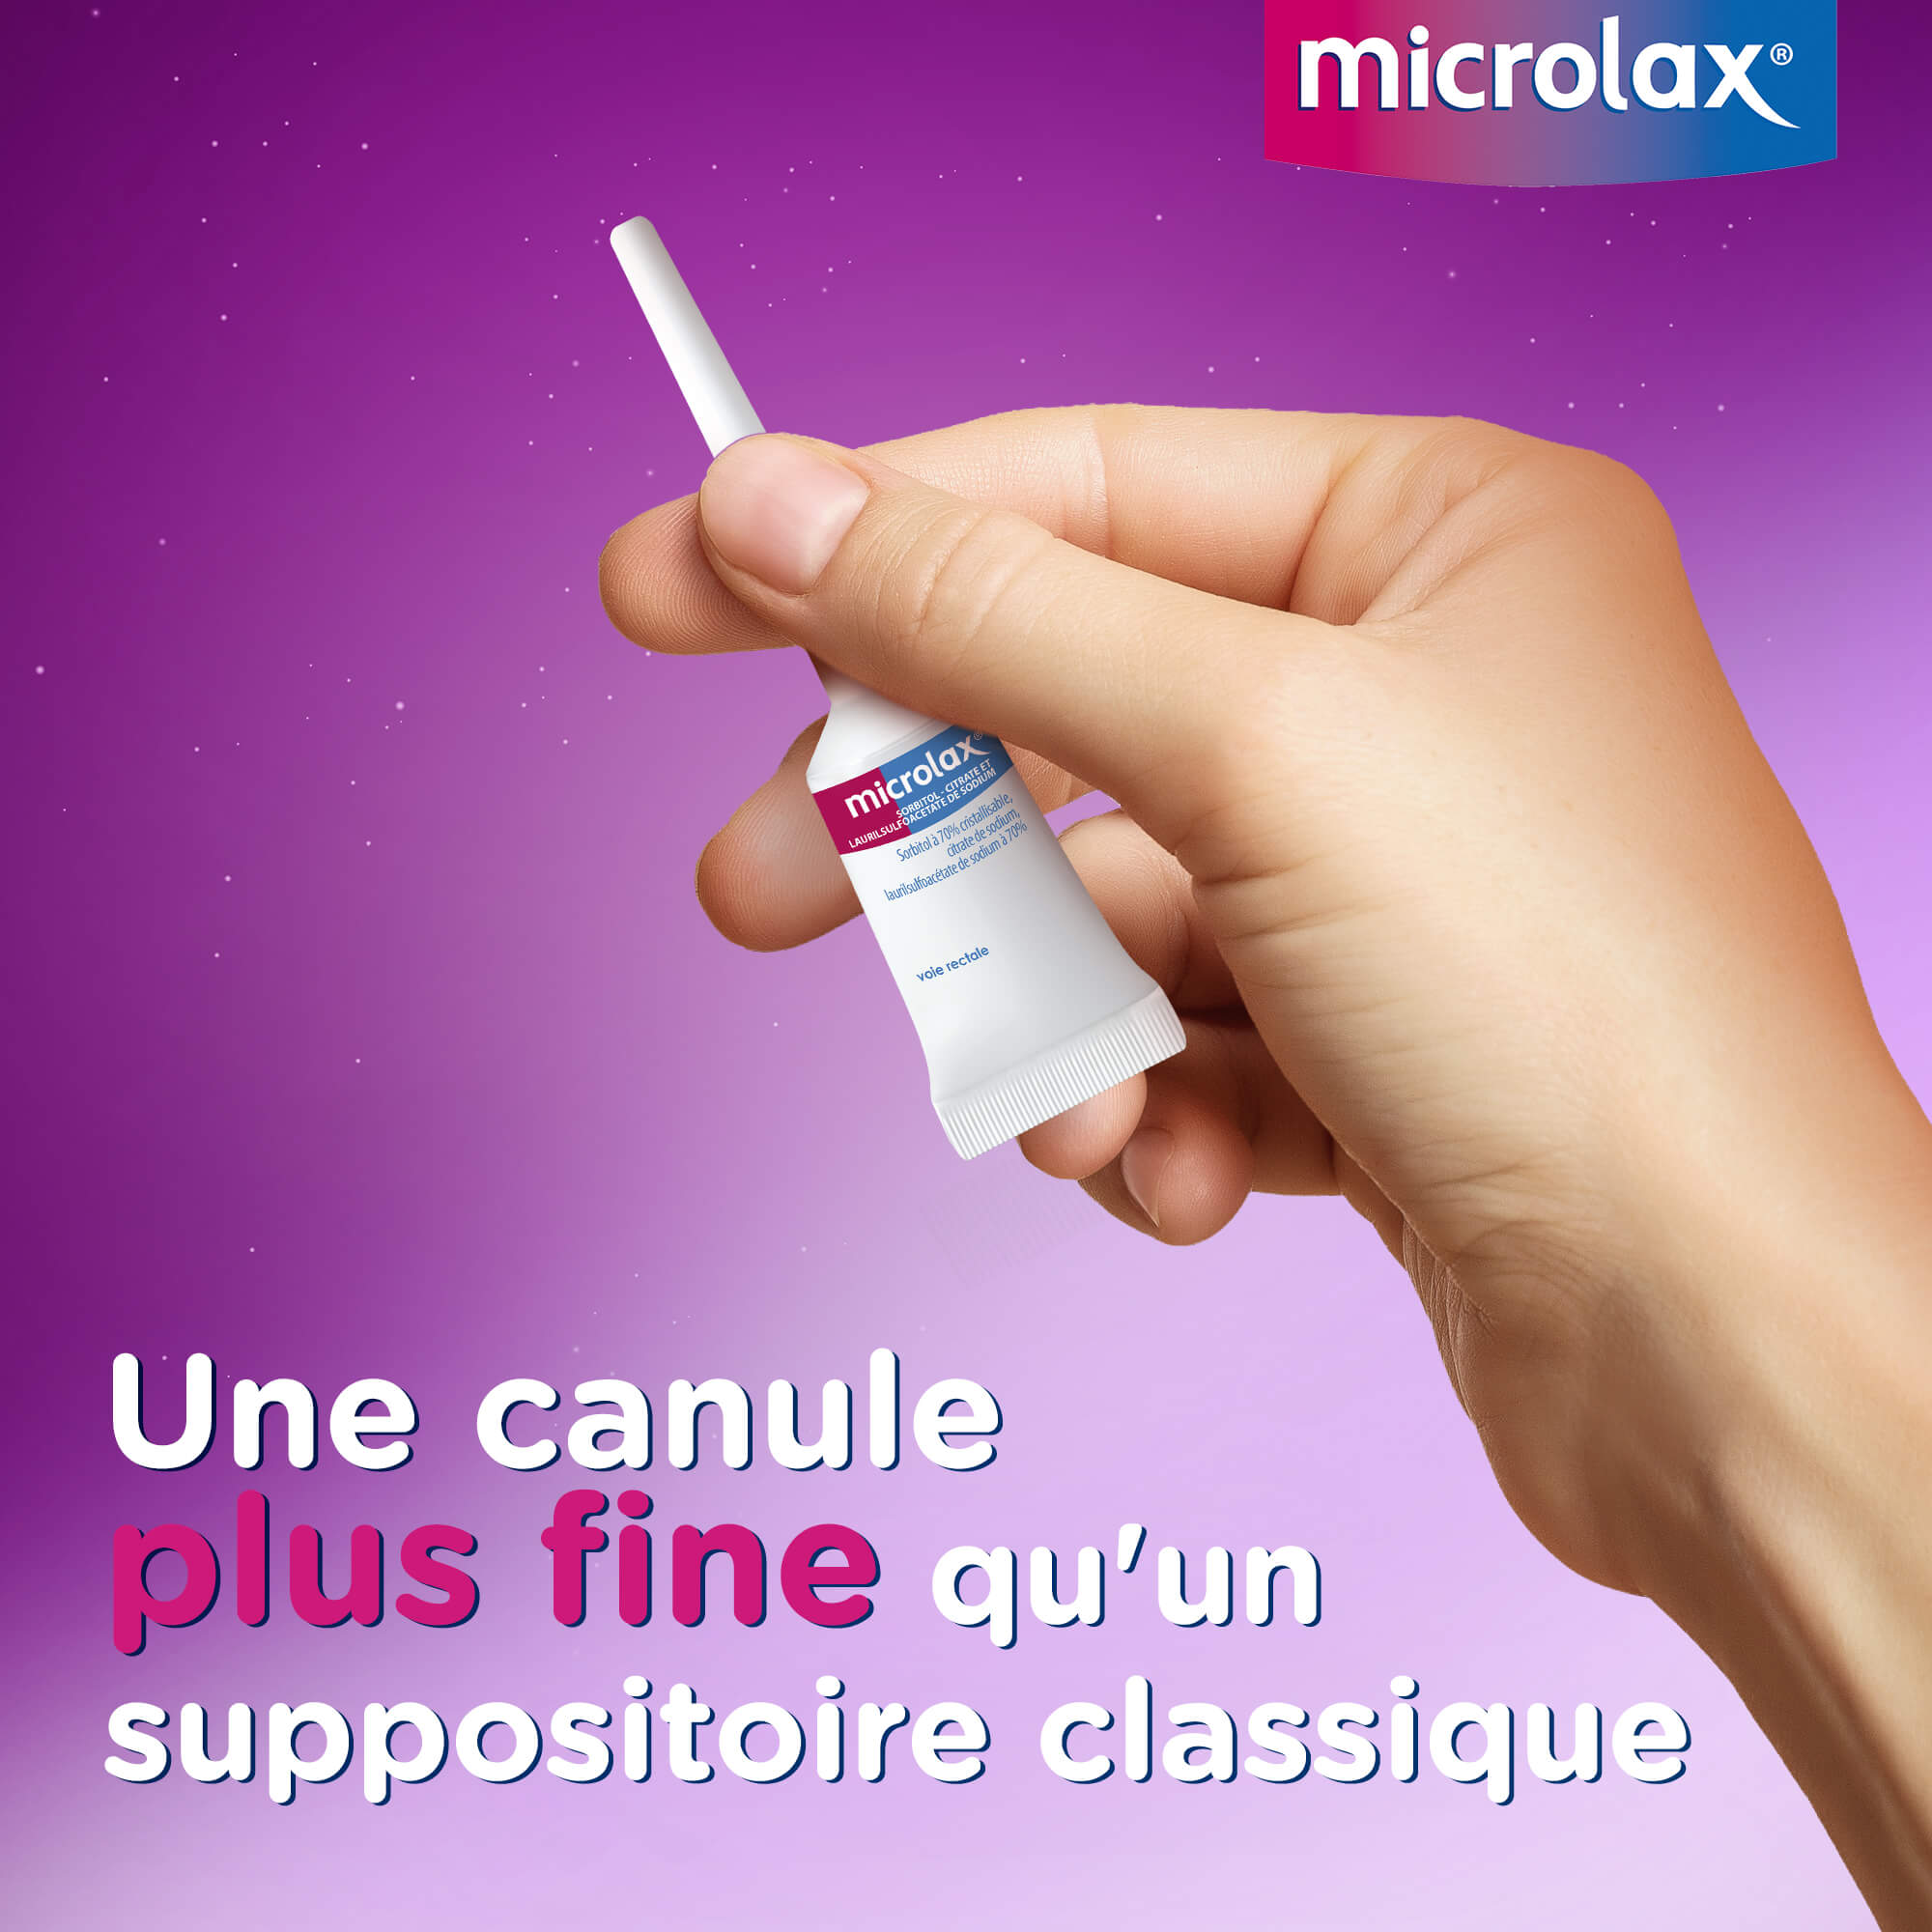 Microlax adulte gel rectal - Constipation - Pharmacie et Nature